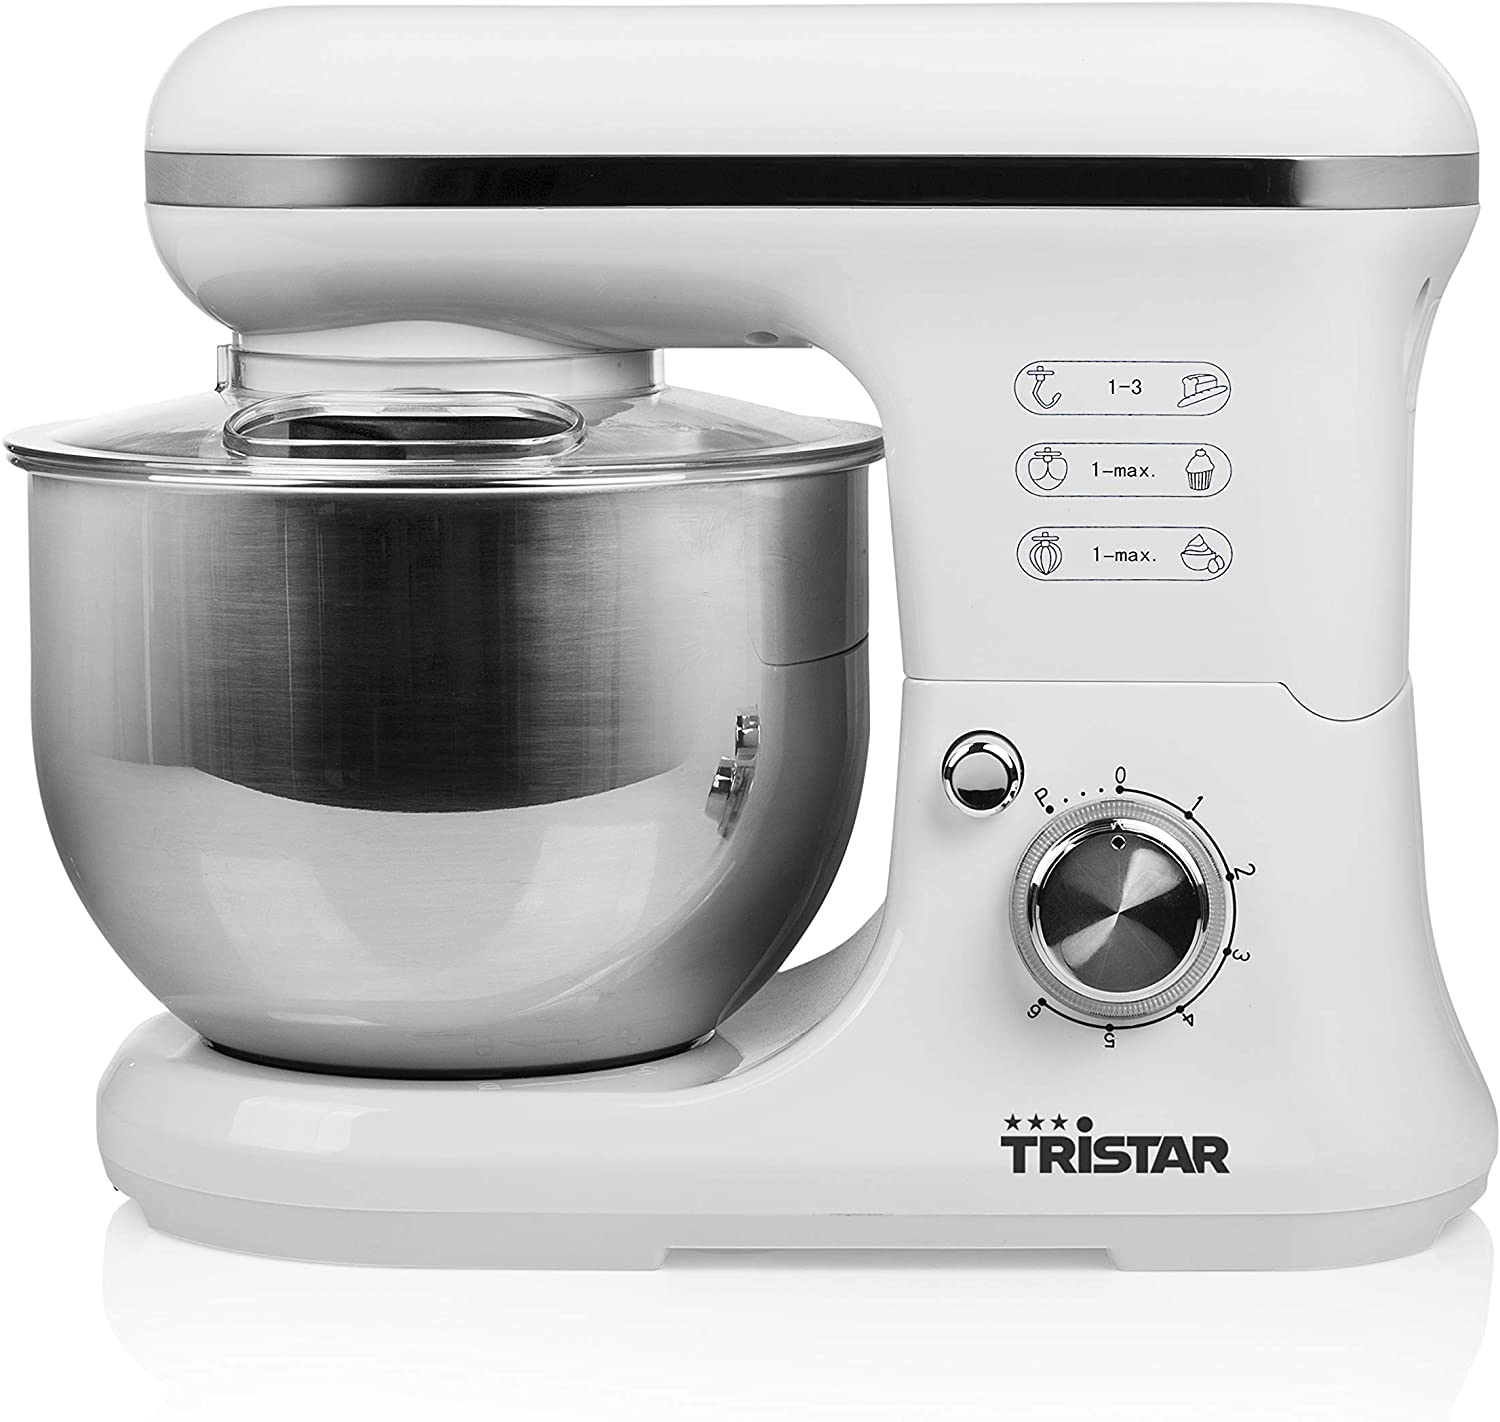 Tristar MX-4817 Multifunctional Food Processor with 5 L Stainless Steel Bowl, 1200 Watt, White, Stainless Steel